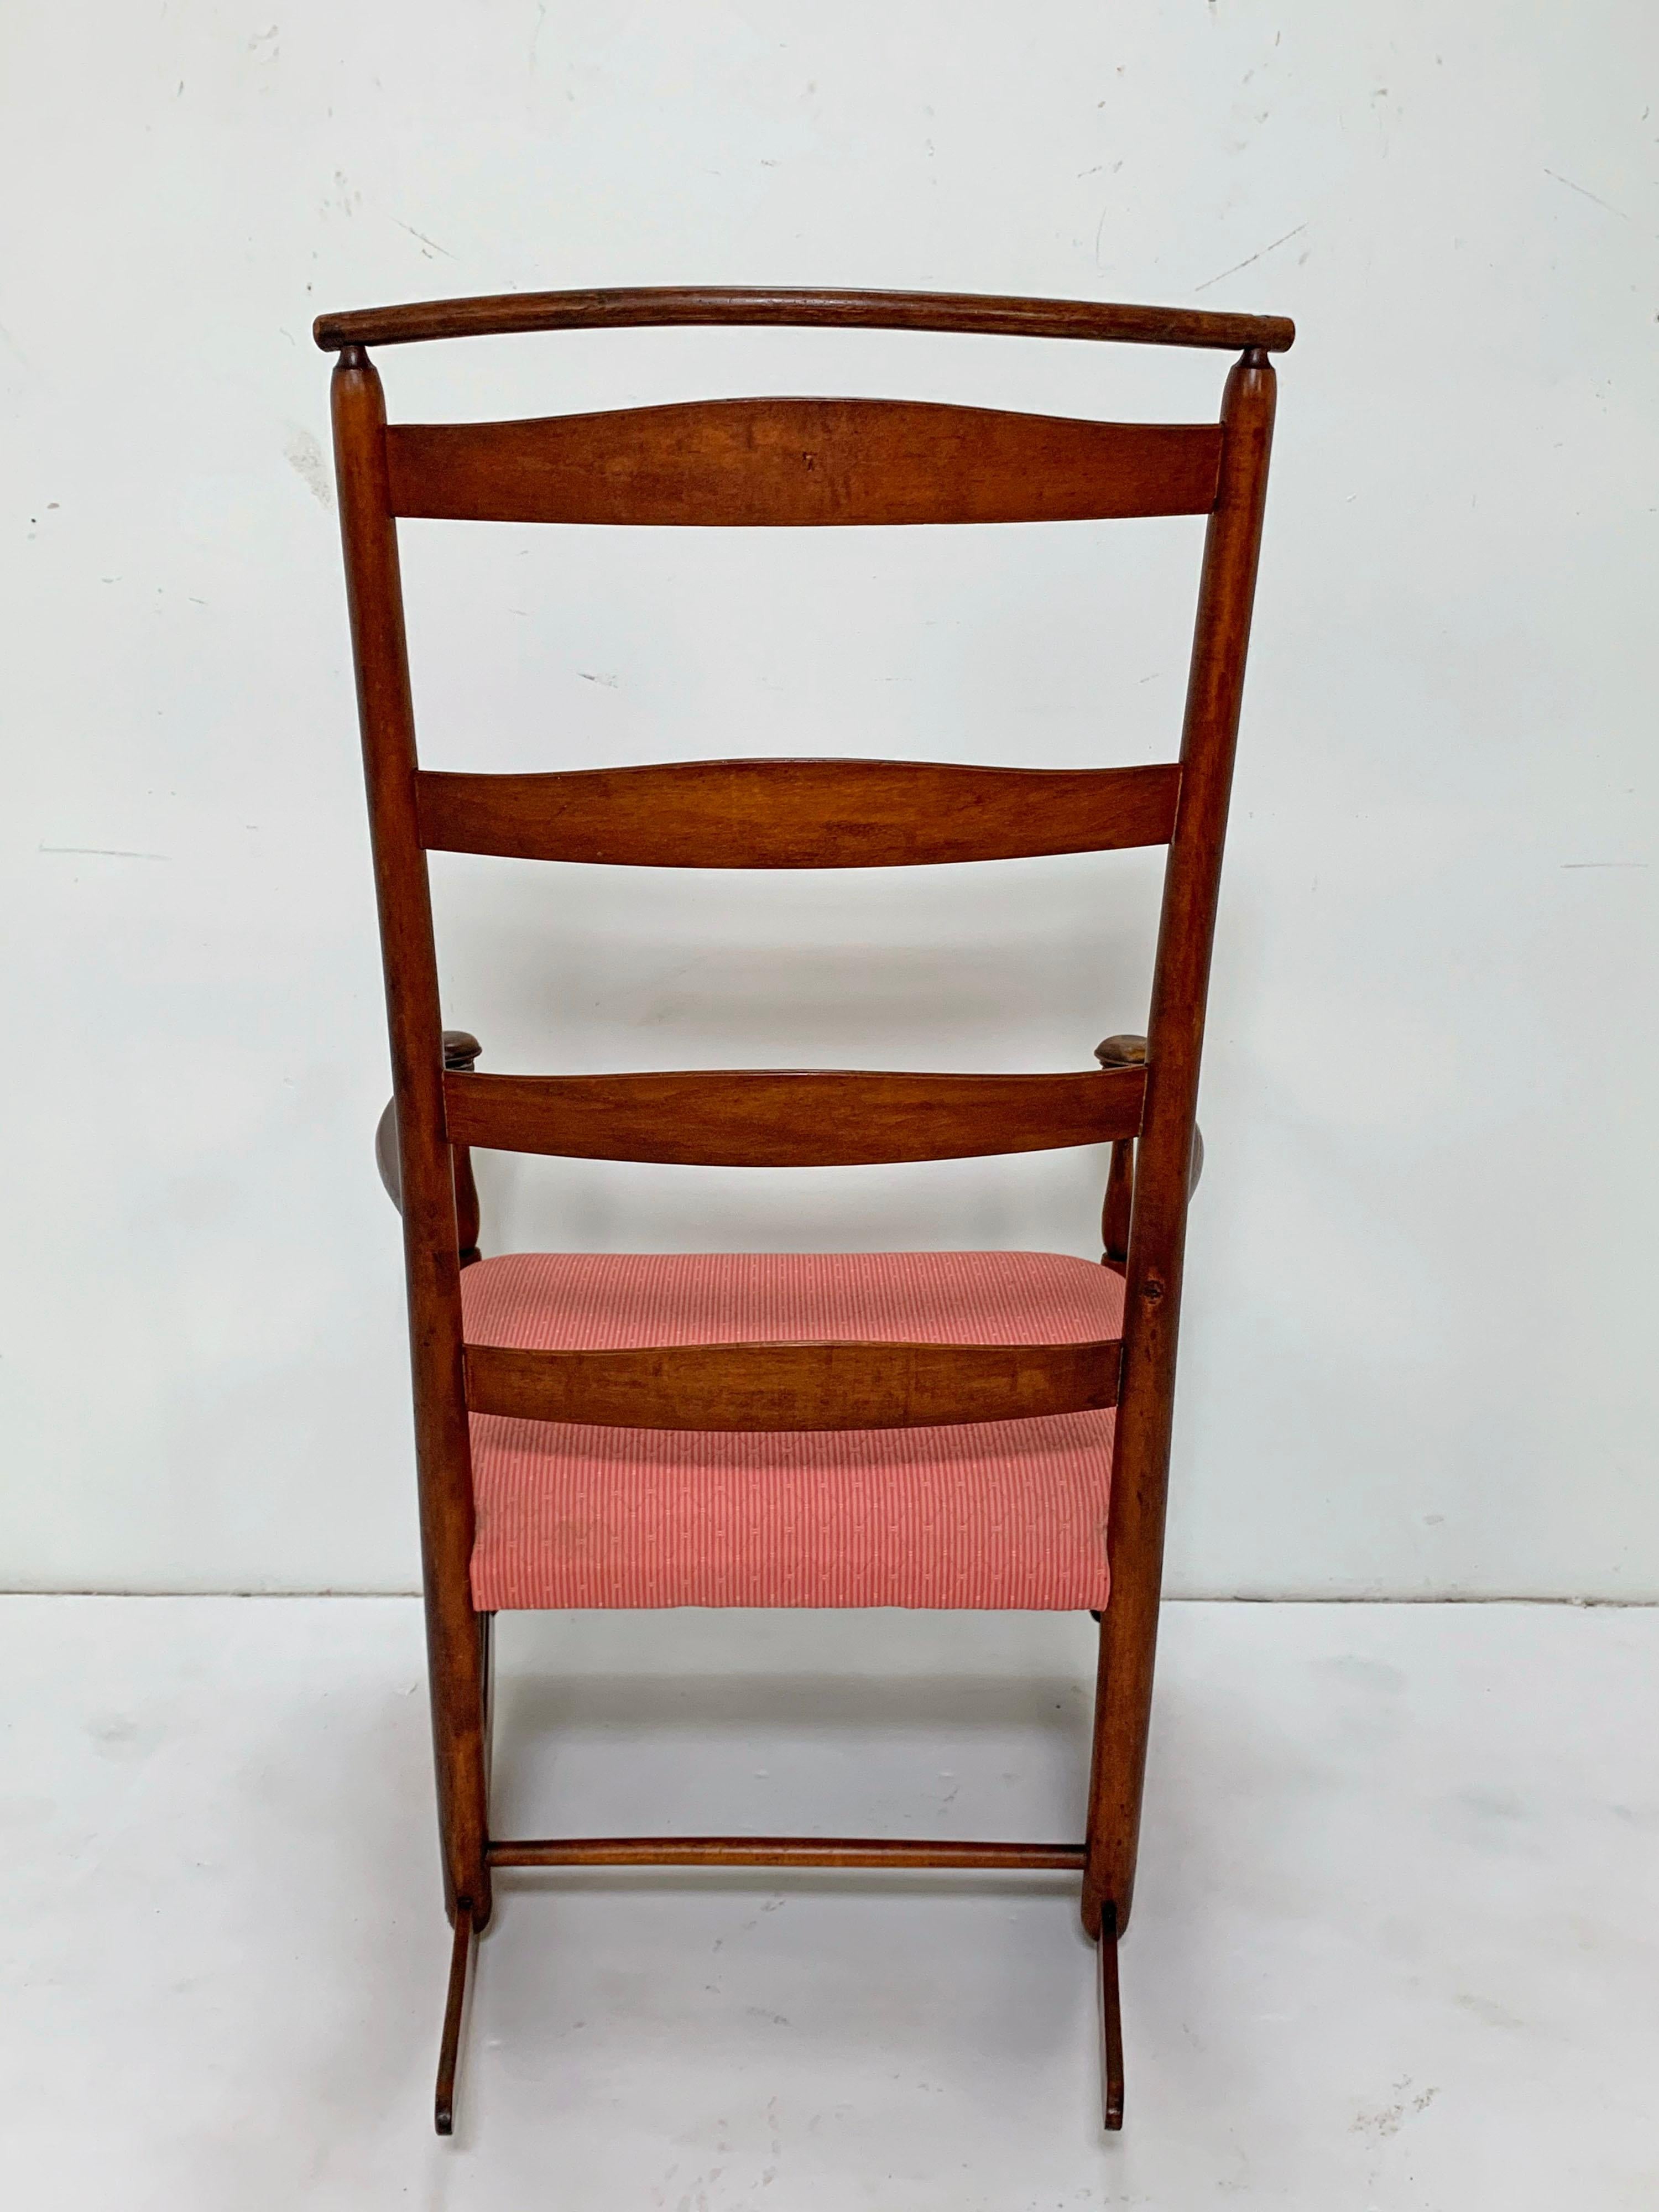 Late 19th Century Antique 19th Century Shaker No. 7 Rocking Chair with Shawl Bar